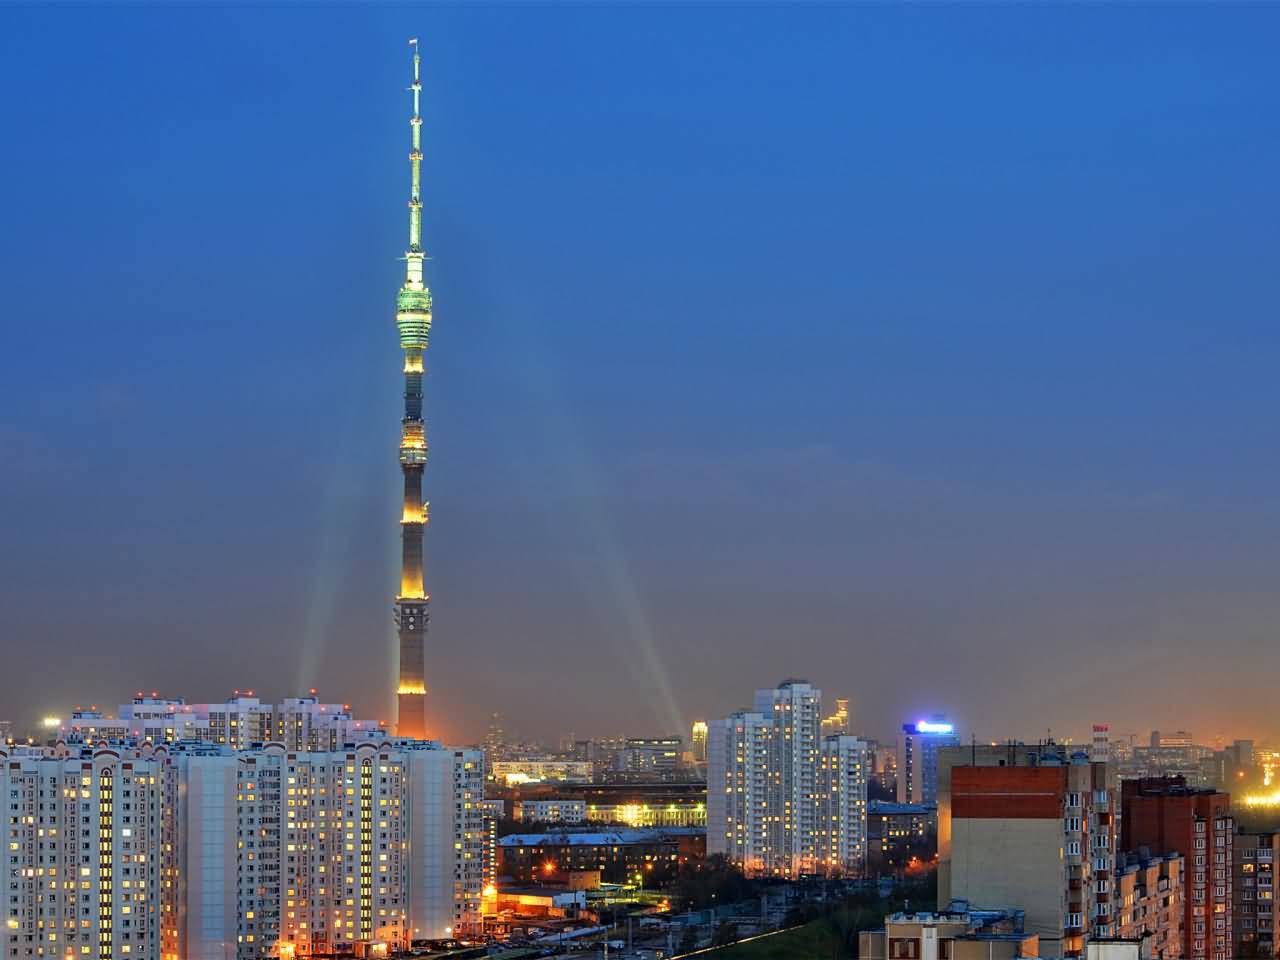 Ostankino Tower In Moscow, Russia At Dusk